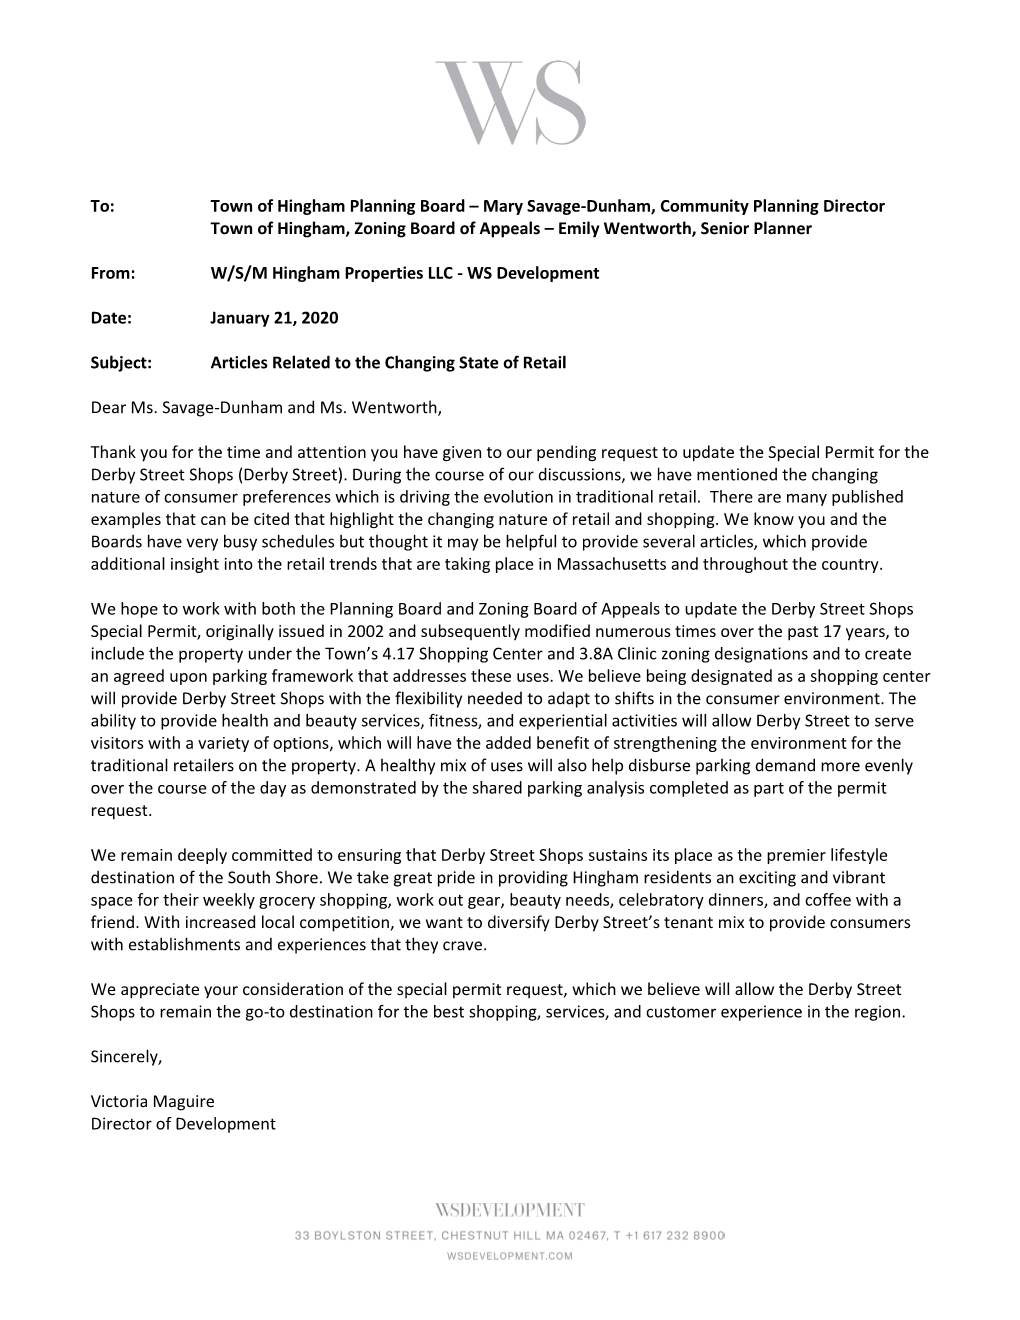 To: Town of Hingham Planning Board – Mary Savage-Dunham, Community Planning Director Town of Hingham, Zoning Board of Appeals – Emily Wentworth, Senior Planner